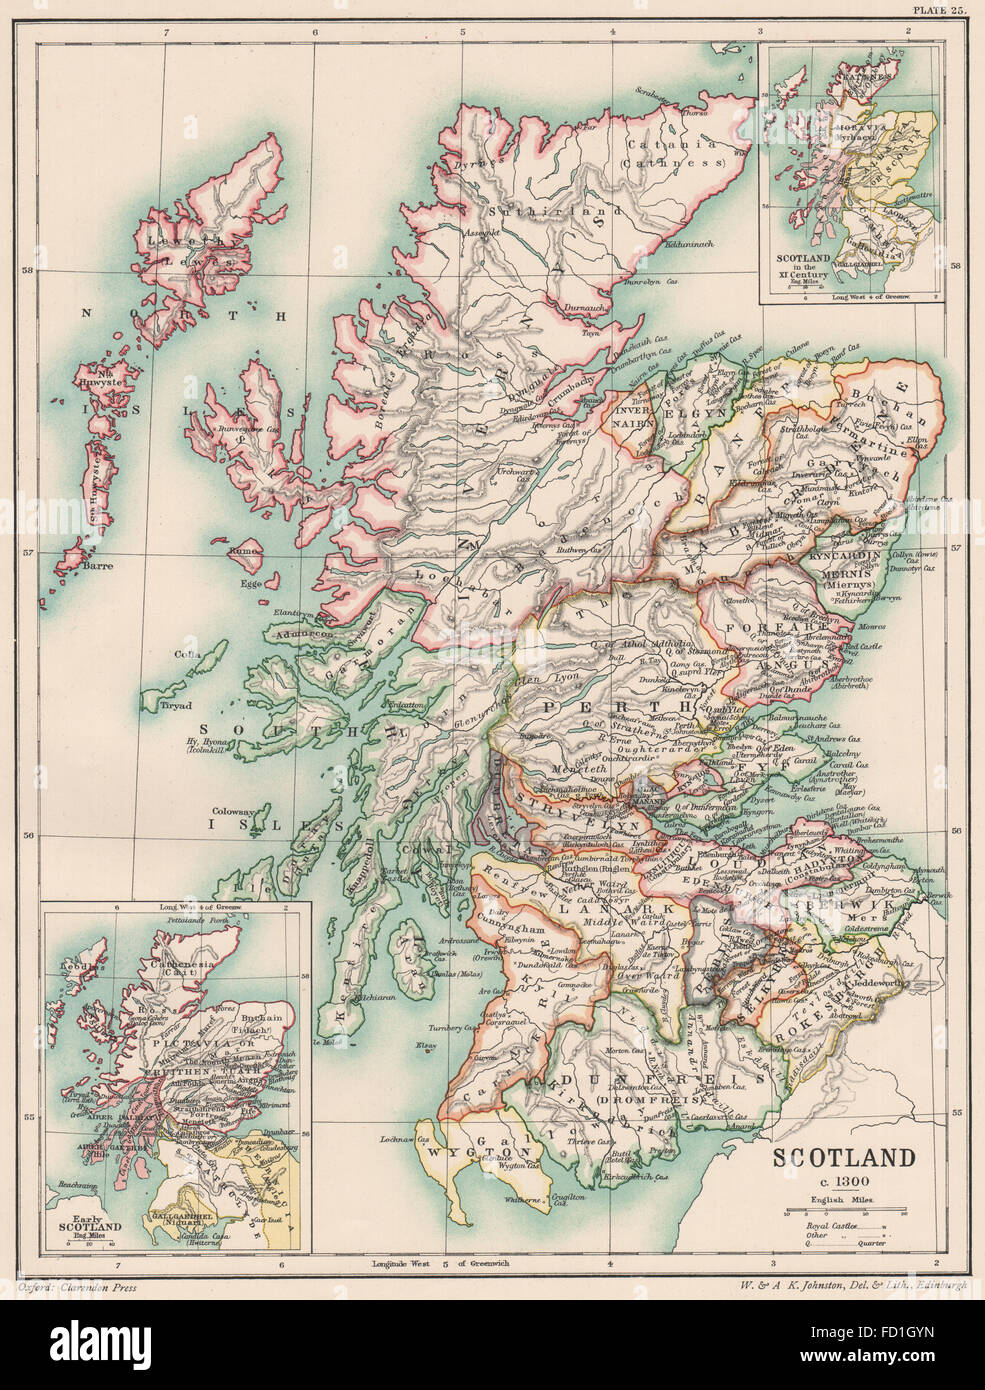 SCOTLAND IN 1300: inset in the 11th Century & Early Scotland, 1902 antique map Stock Photo